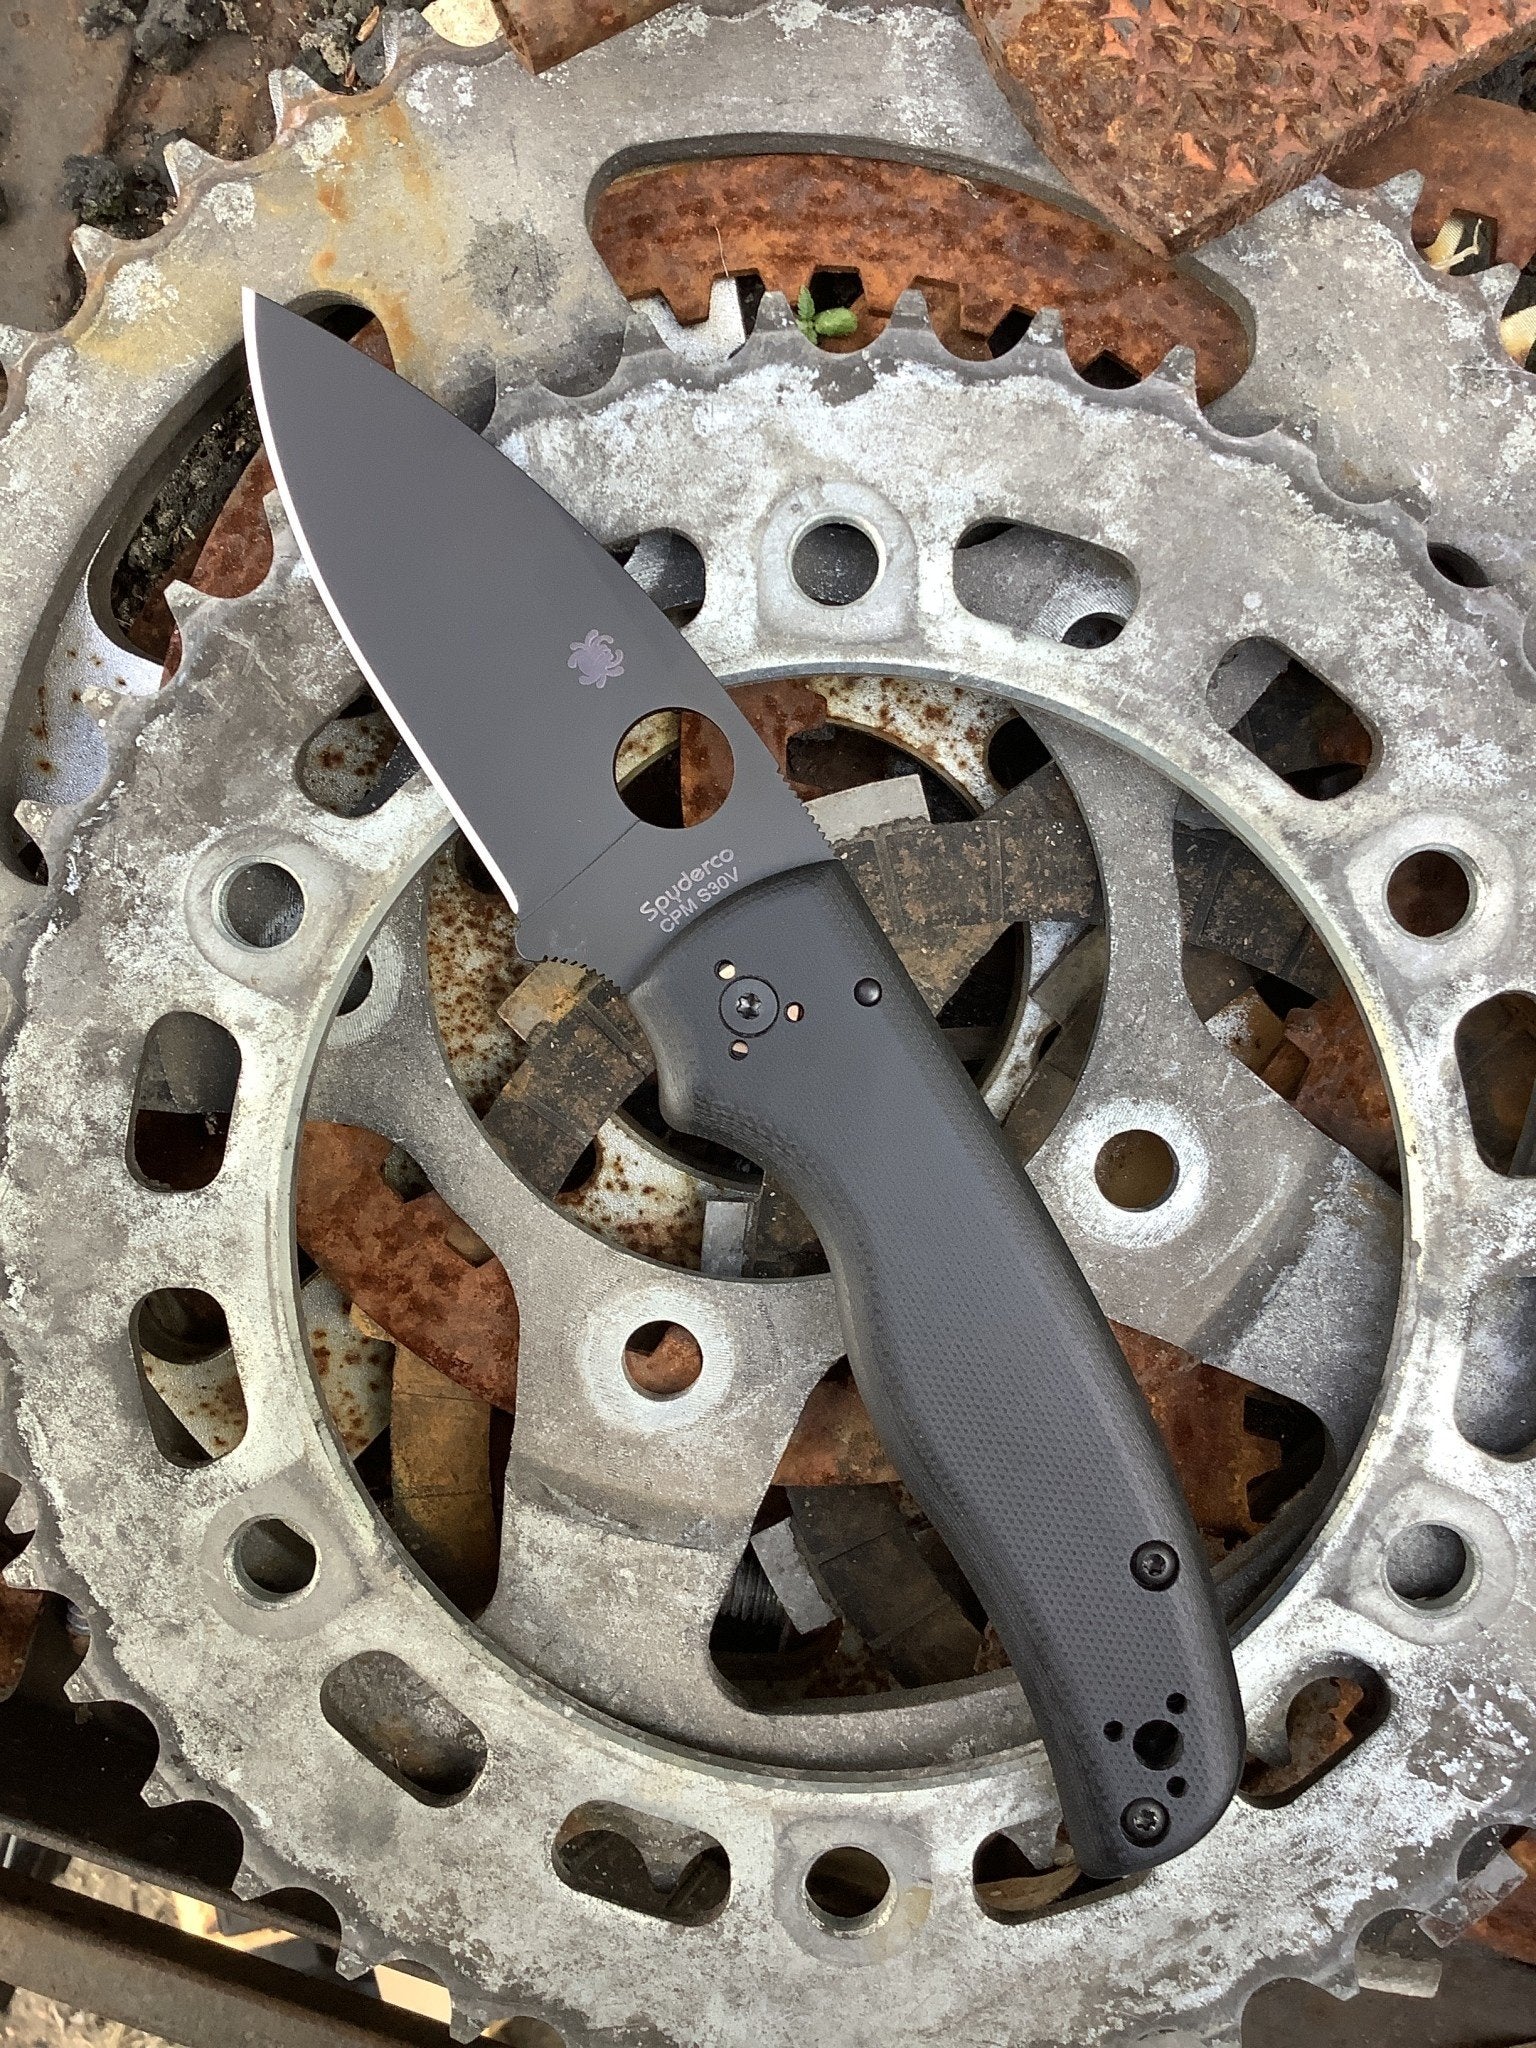 Spyderco Shaman BK with S30V steel and Black G-10